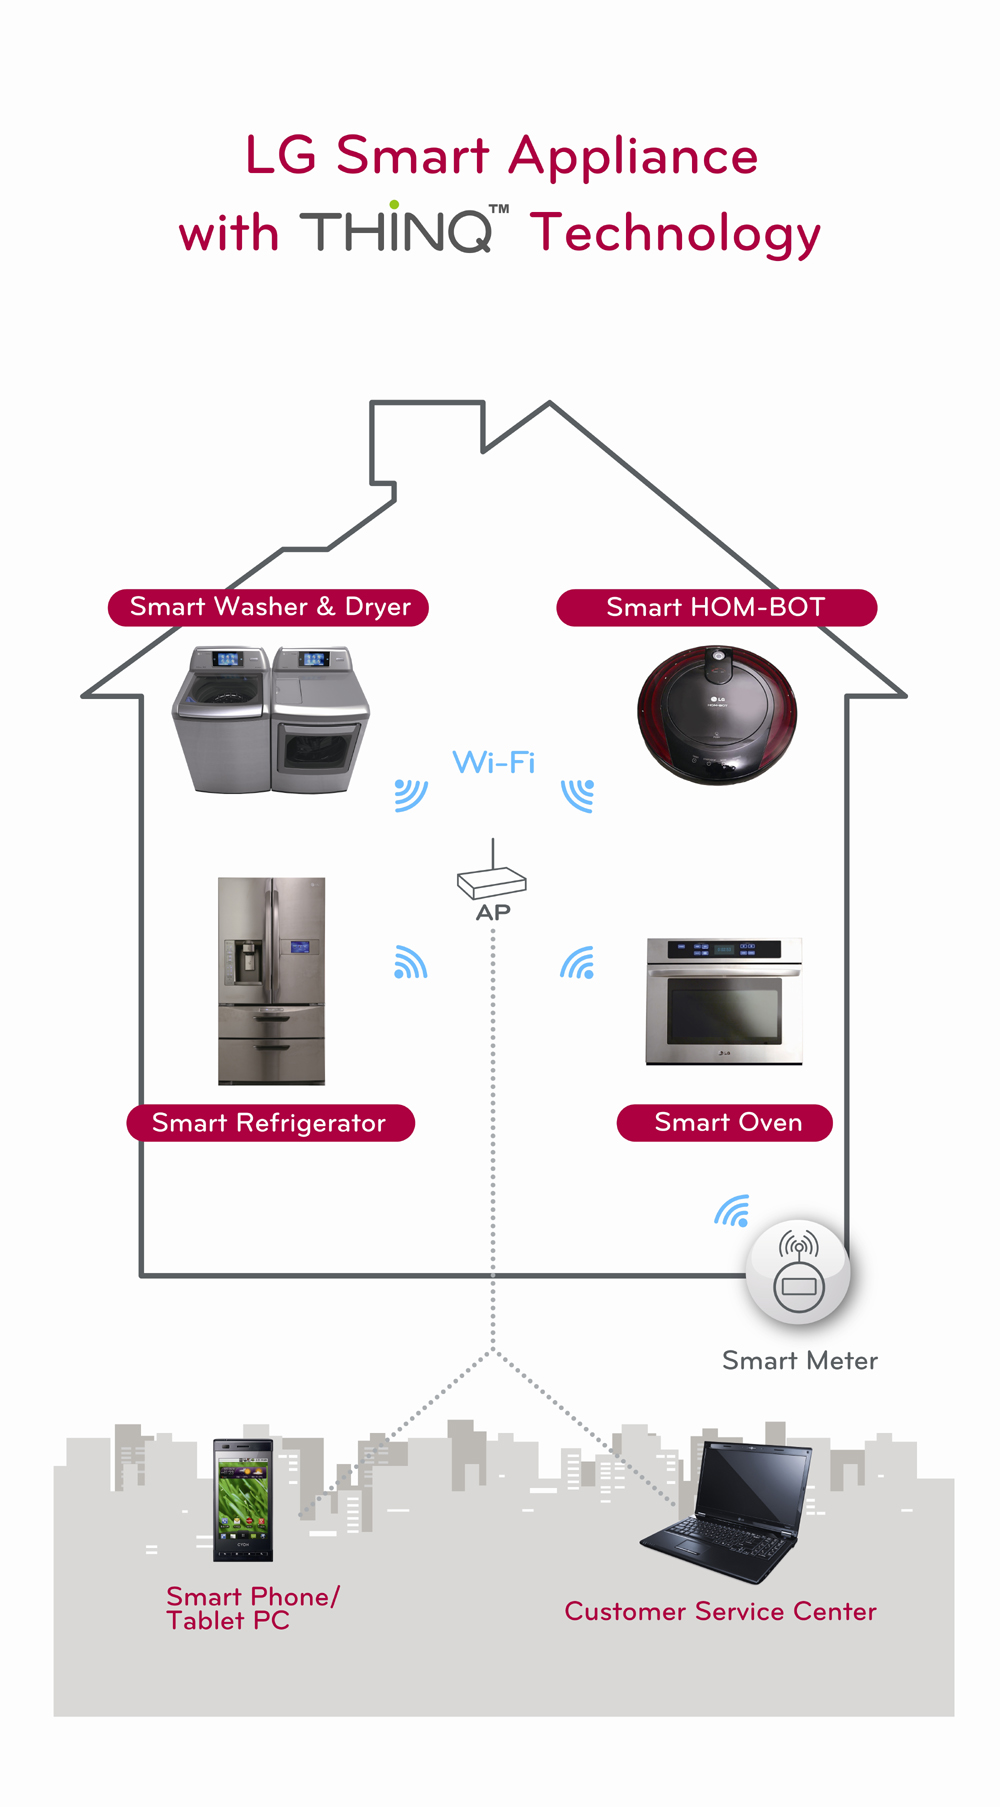 A diagram displaying LG’s ThinQ Smart Appliances, showing its Wi-Fi-enabled Washer and Dryer, Hom-Bot, Refrigerator and Oven connected via an access point, and controlled by a smartphone or tablet with easy access to customer service